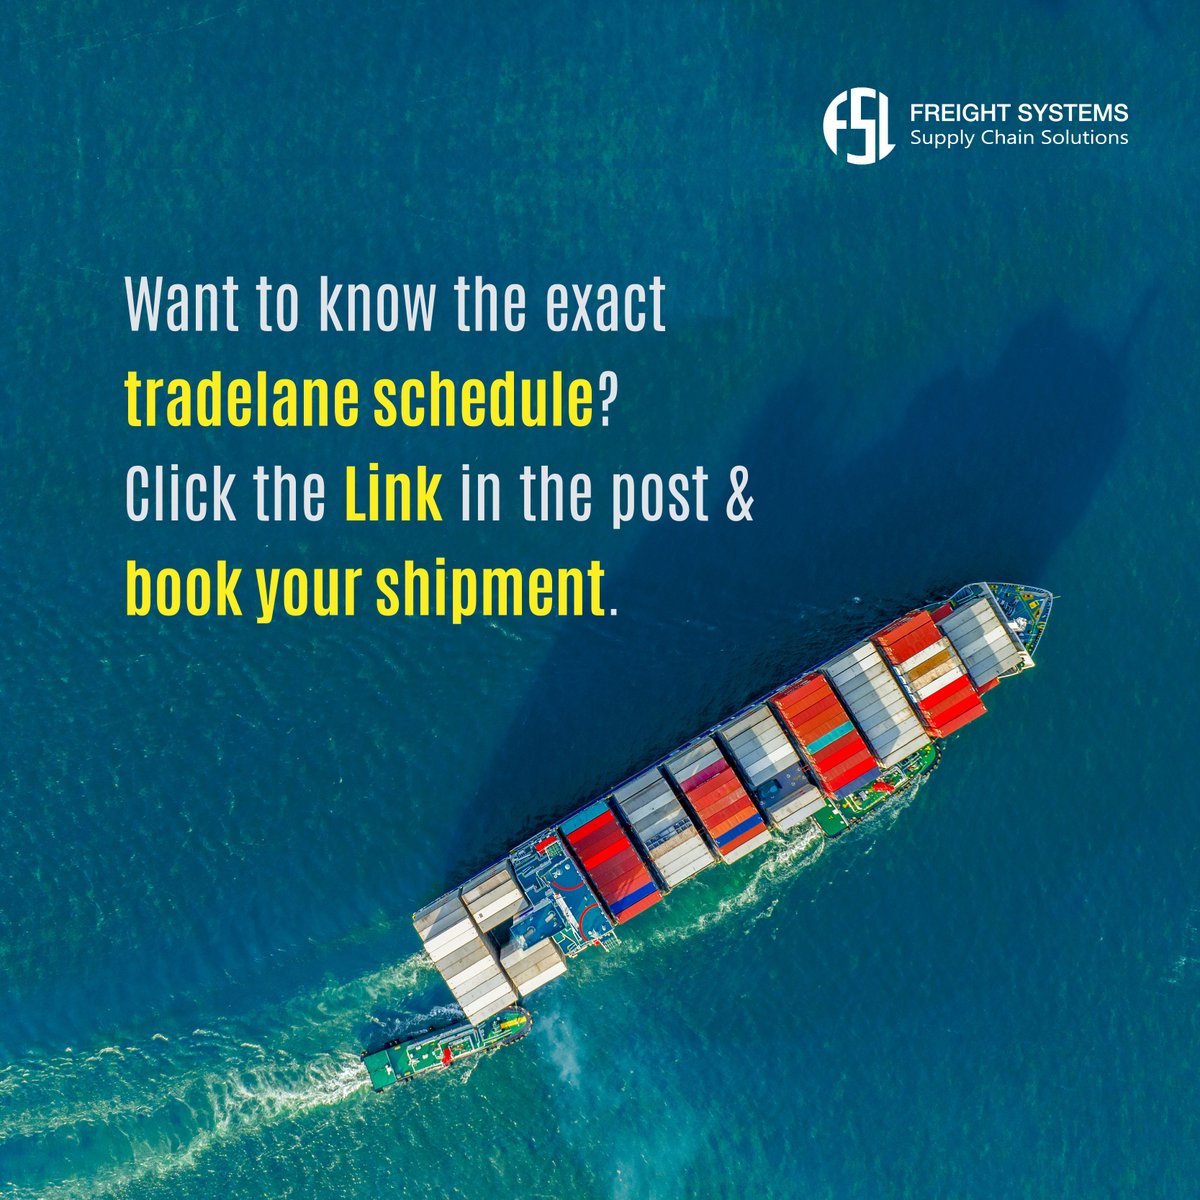 Let's sail the seas of success together. 🌊🤝 Are you ready to be part of this transformative journey? 

Get the schedule👉 bit.ly/46VUQeU

#TradeLondonJebelAli #GlobalCommerce #freightforwarding #freightsystems #equote #maritime